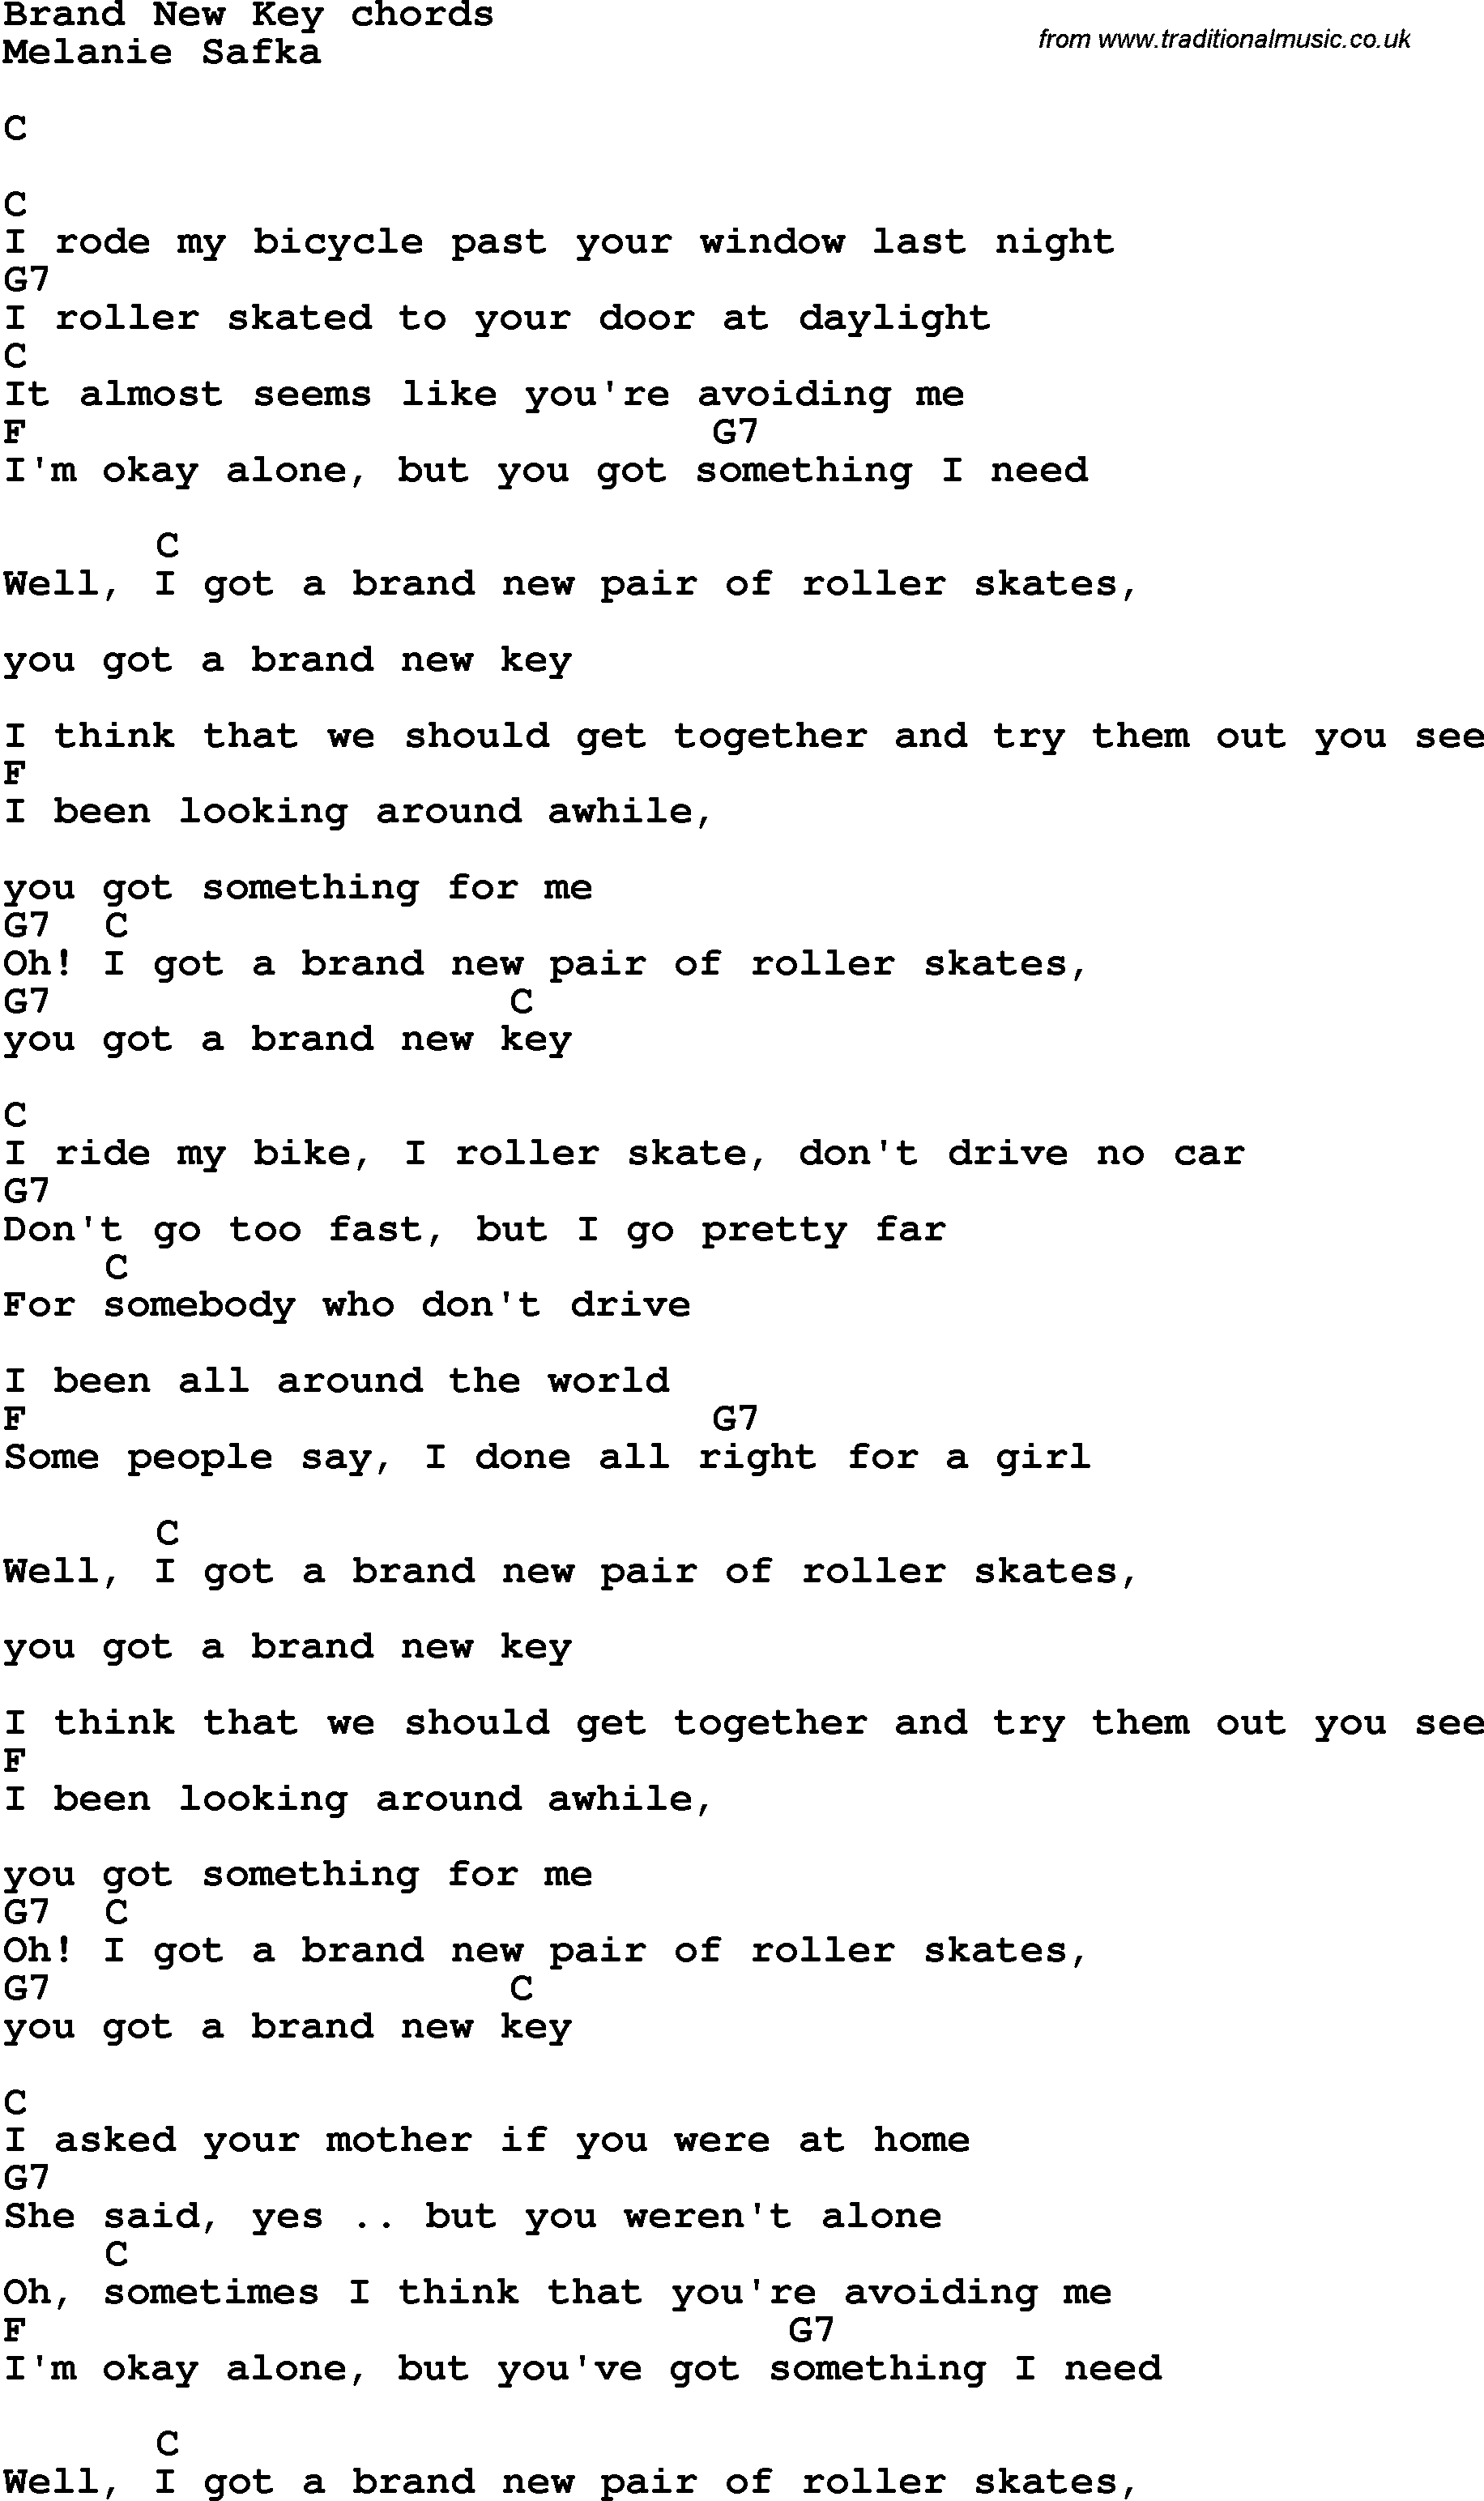 Song Lyrics with guitar chords for Brand New Key